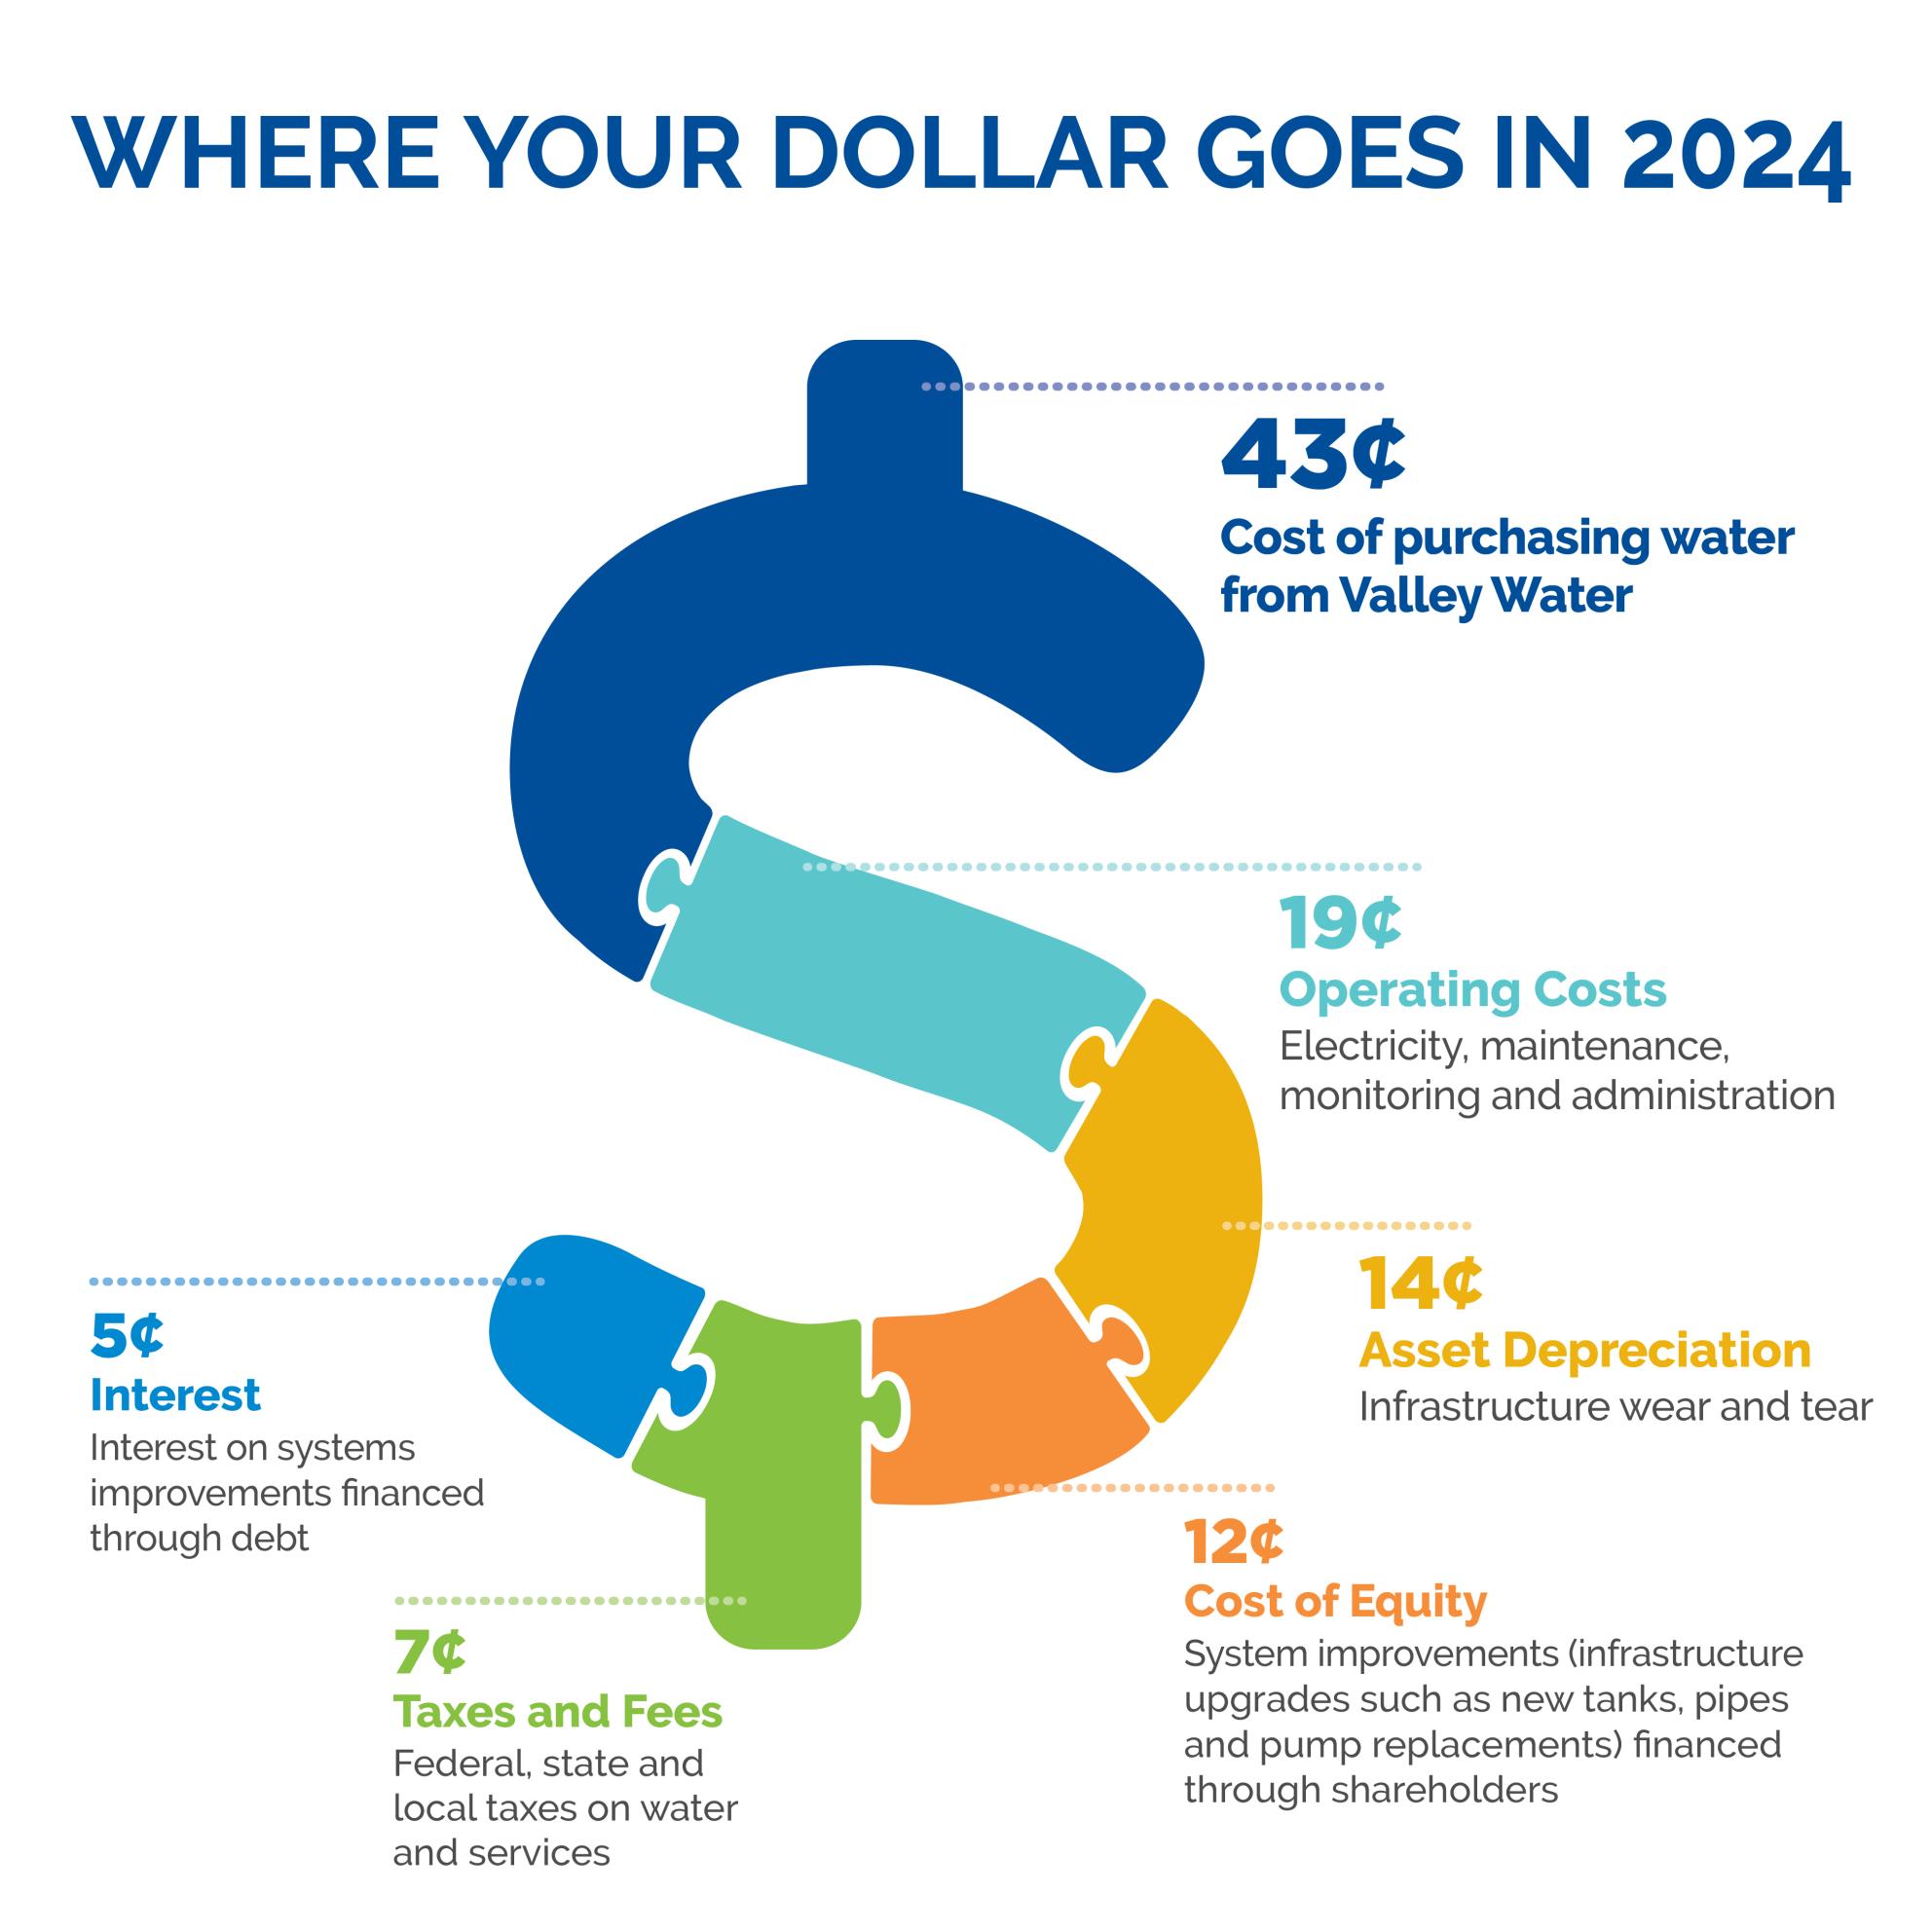 Where Your Dollar Goes in 2024 graphic